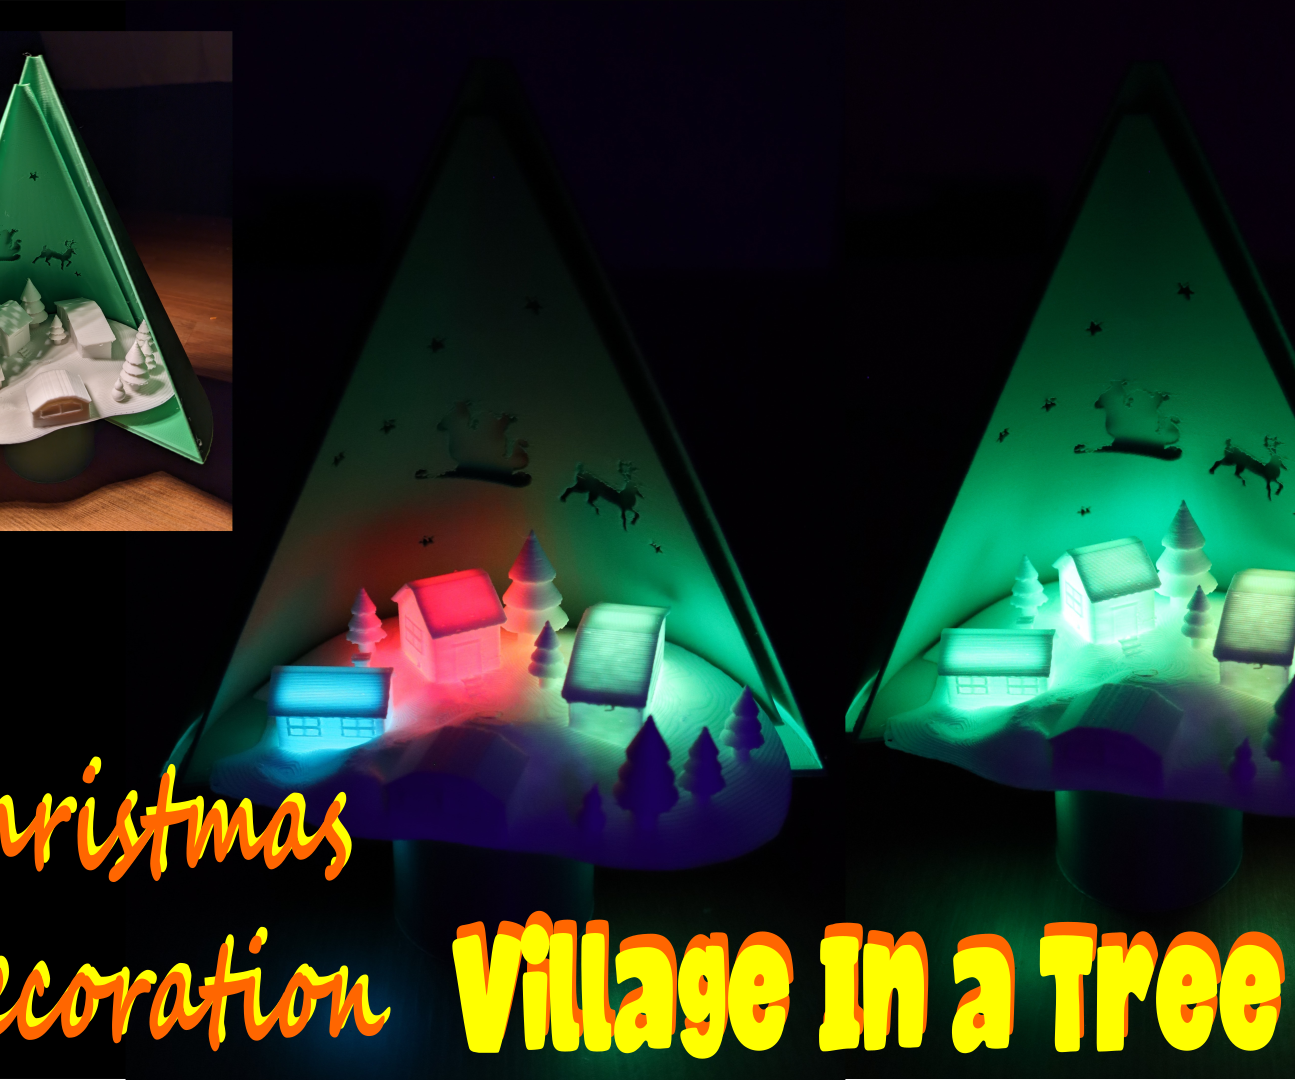 Christmas Decoration: Village in a Tree